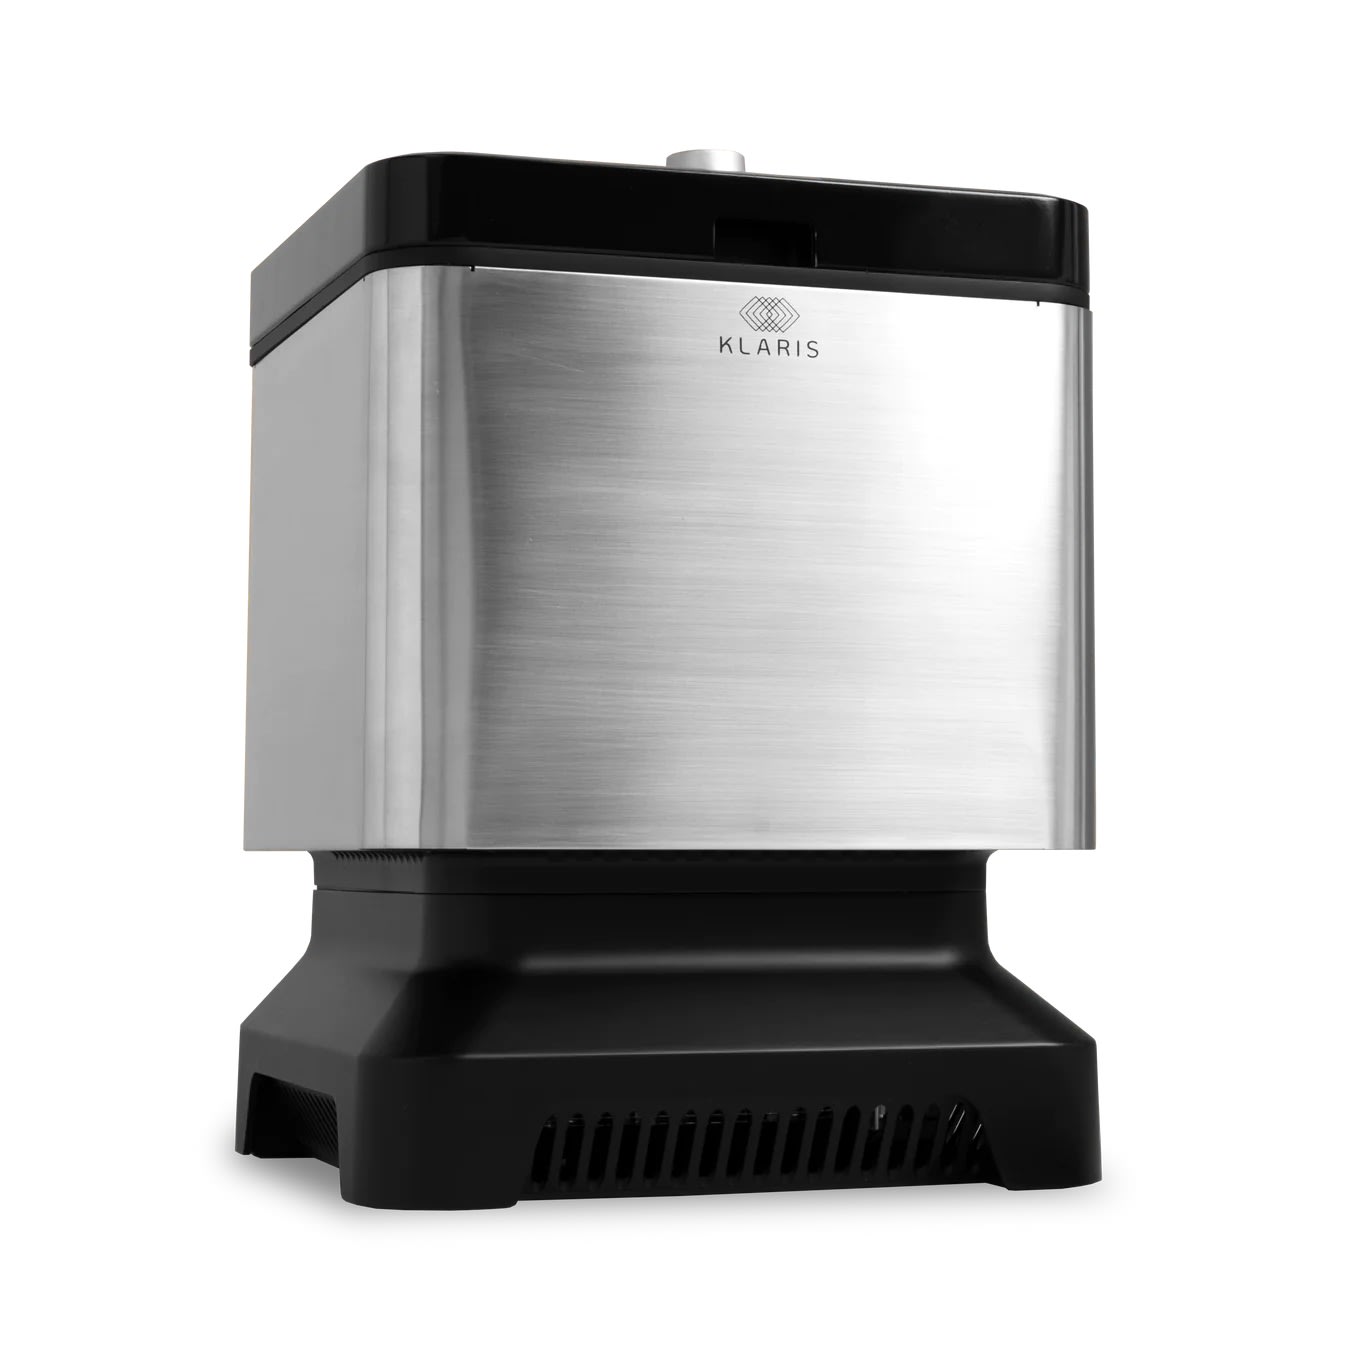 Our Favorite Ice Maker Is Over $100 Off and Can Produce at Least